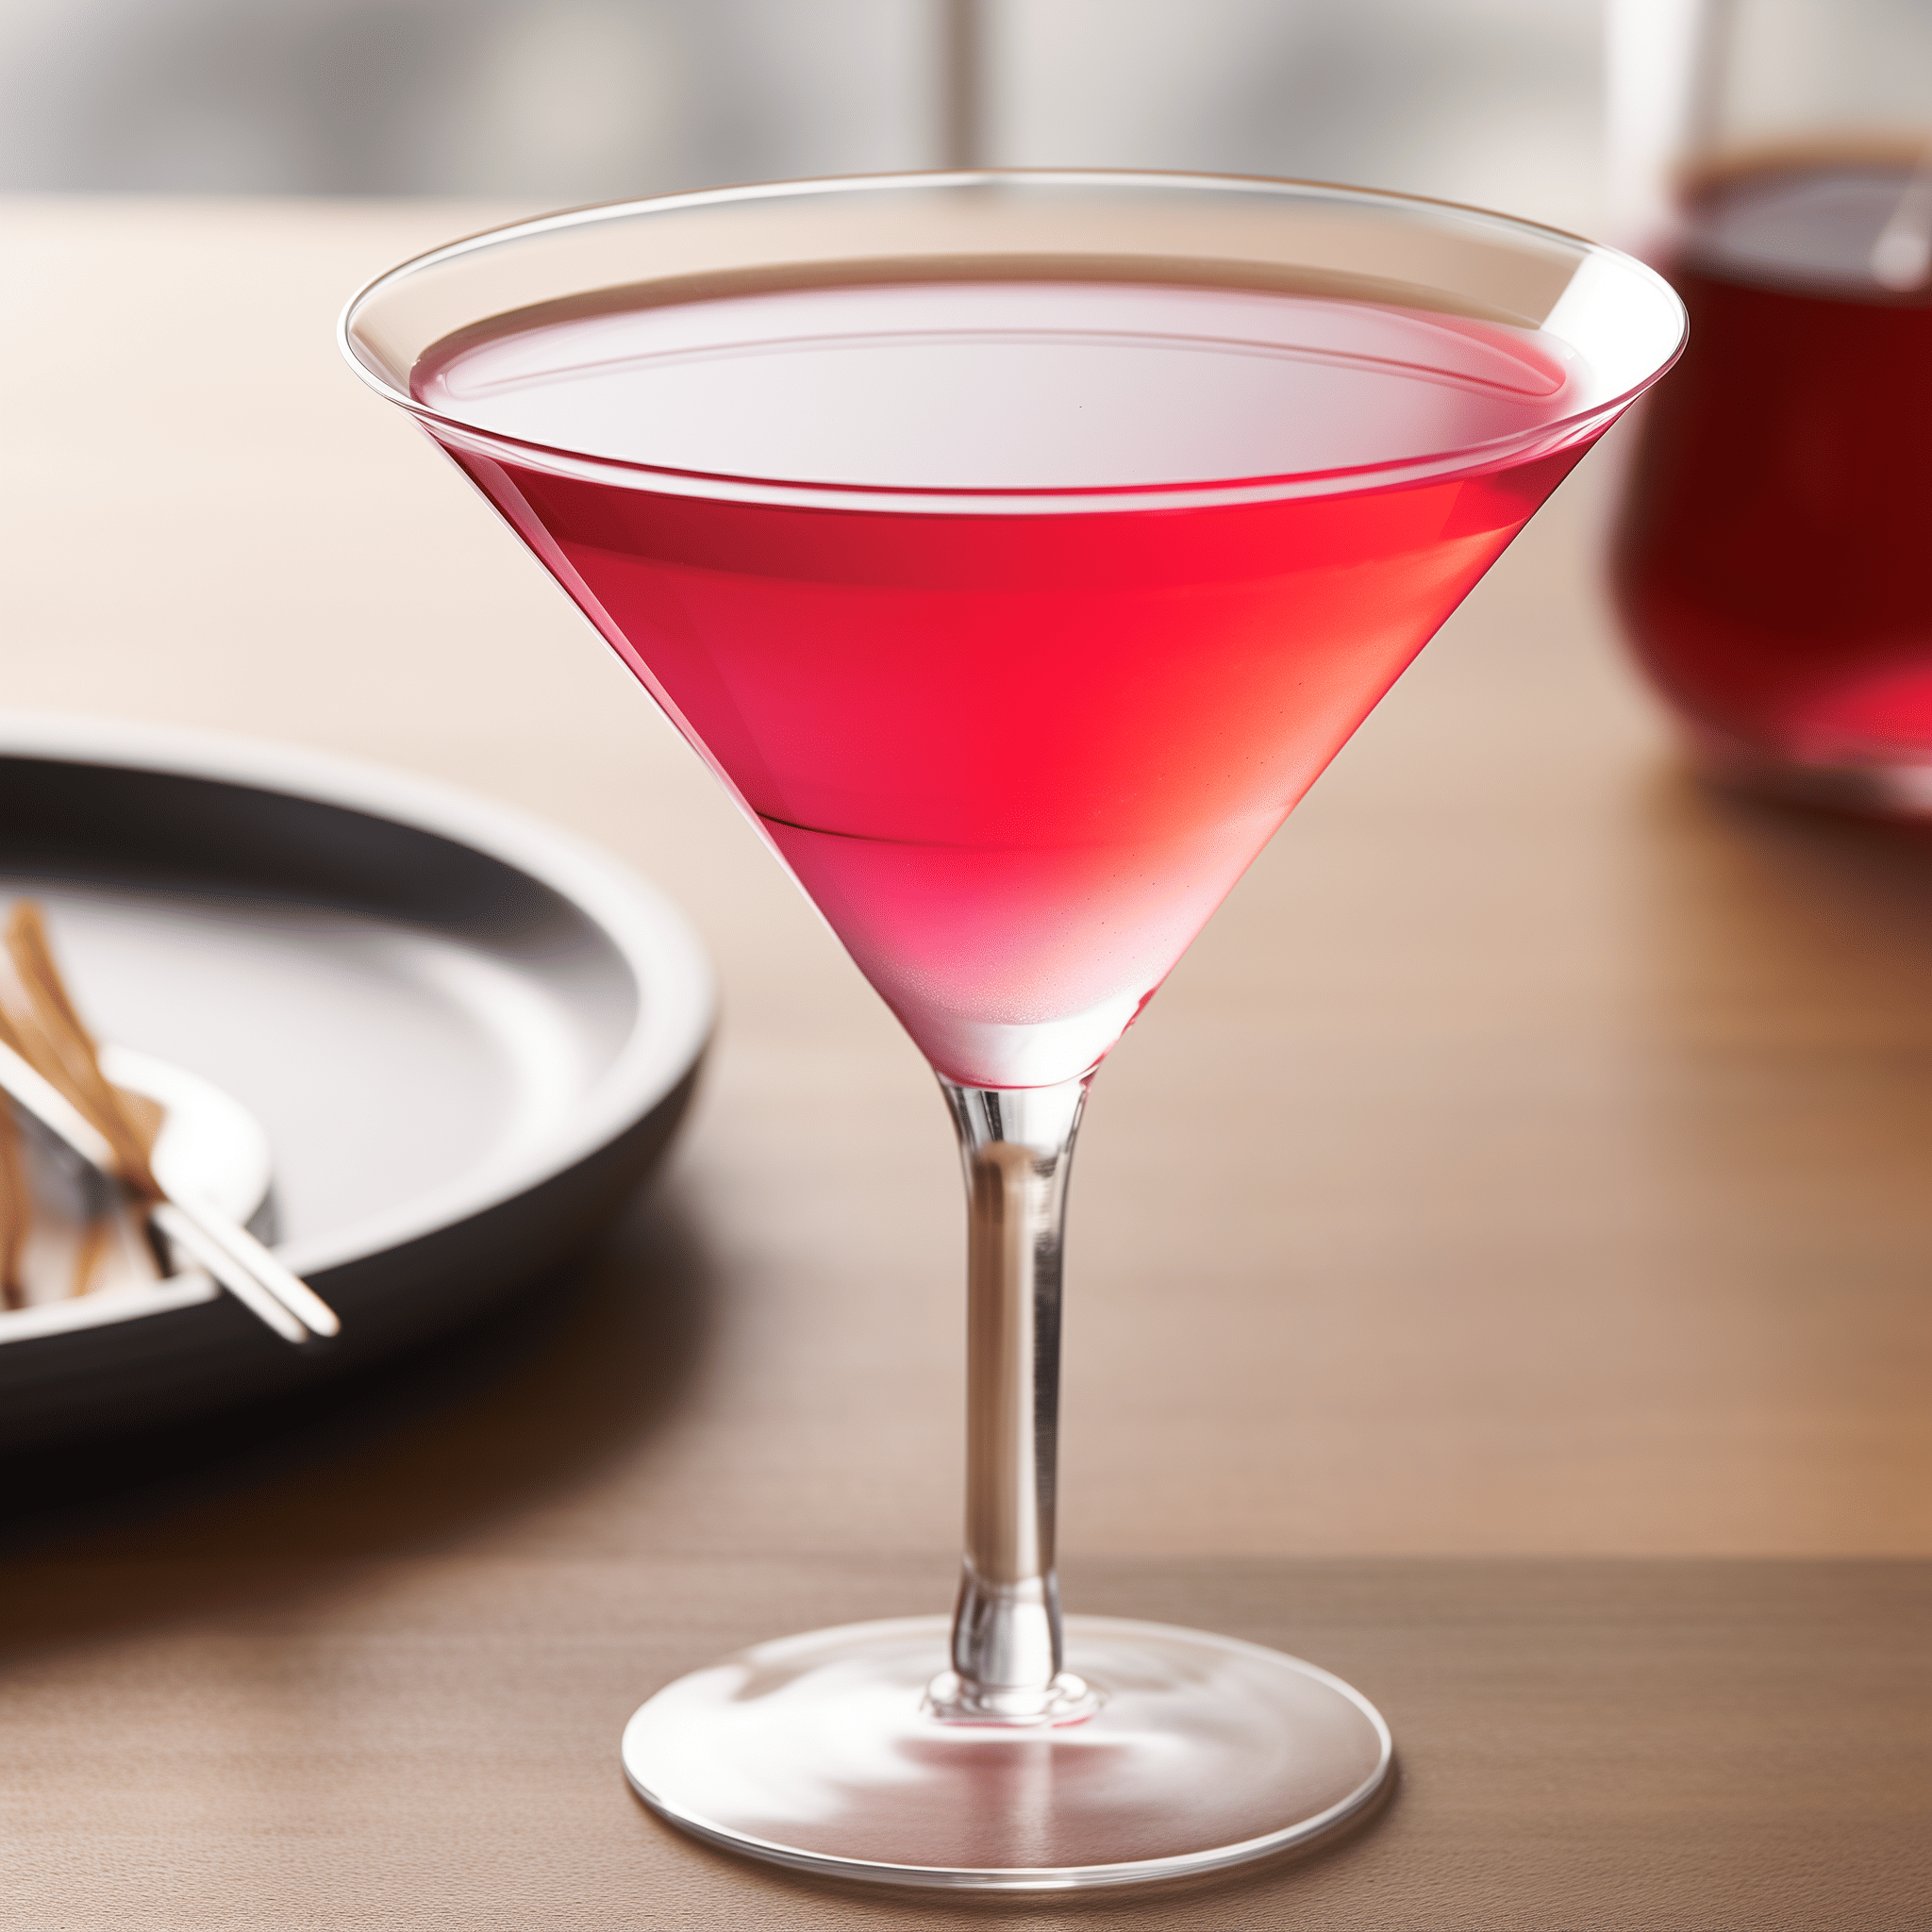 Tartini Cocktail Recipe - The Tartini cocktail offers a harmonious blend of sweet and tart. The cranberry juice provides a sharp tanginess, which is beautifully balanced by the sweetness of the raspberries. The vodka adds a clean, crisp spirit that carries the flavors without overpowering them.